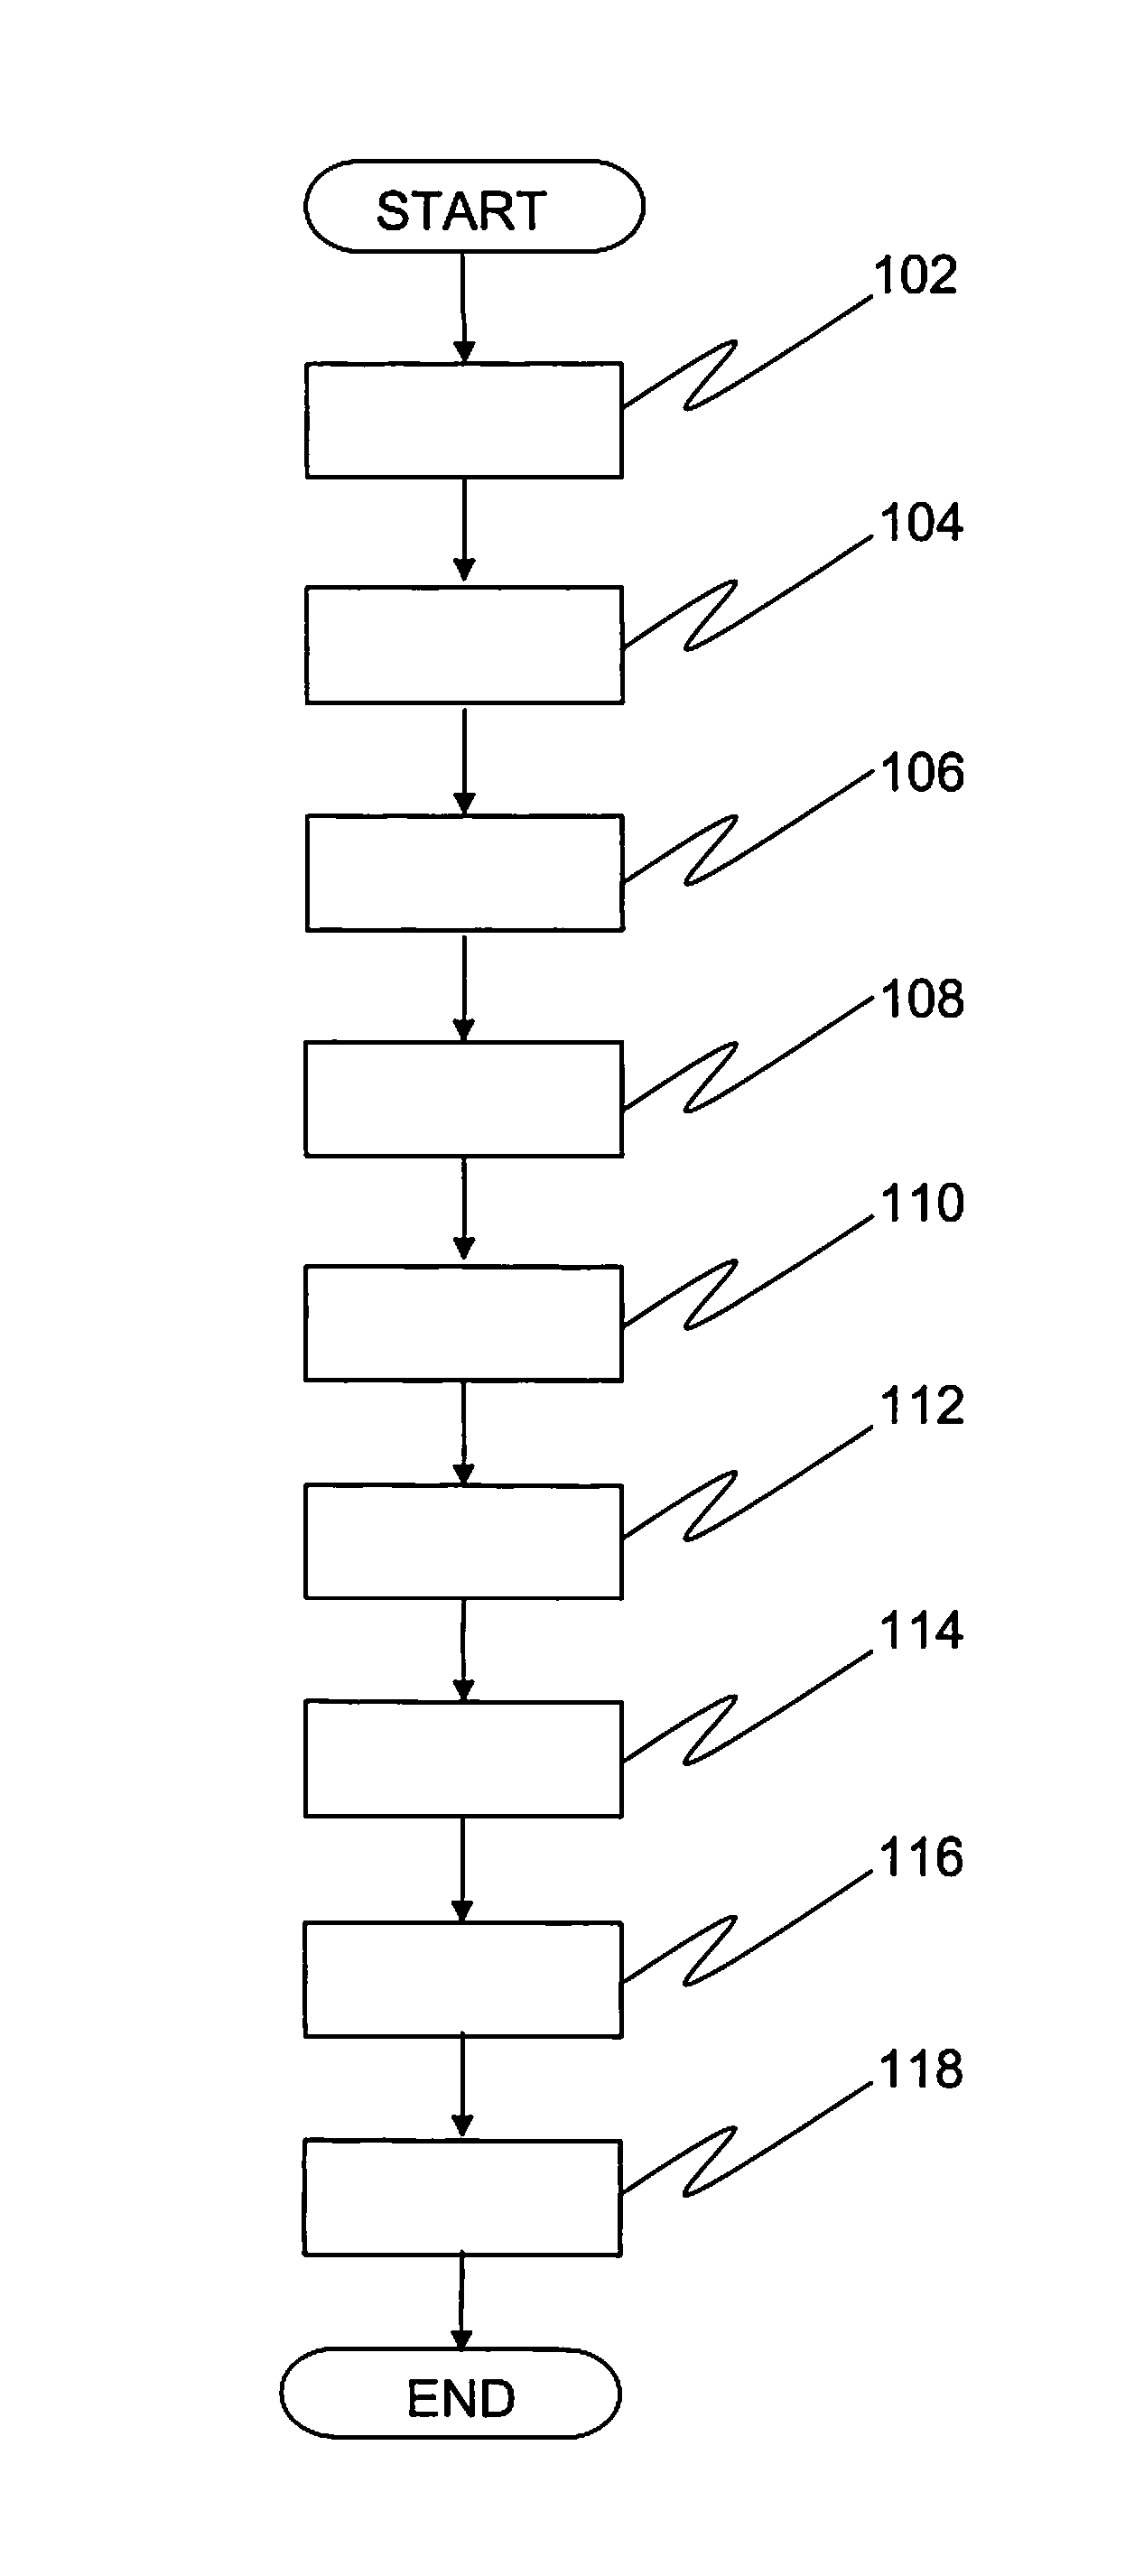 Wettable silicone hydrogel contact lenses and related compositions and methods